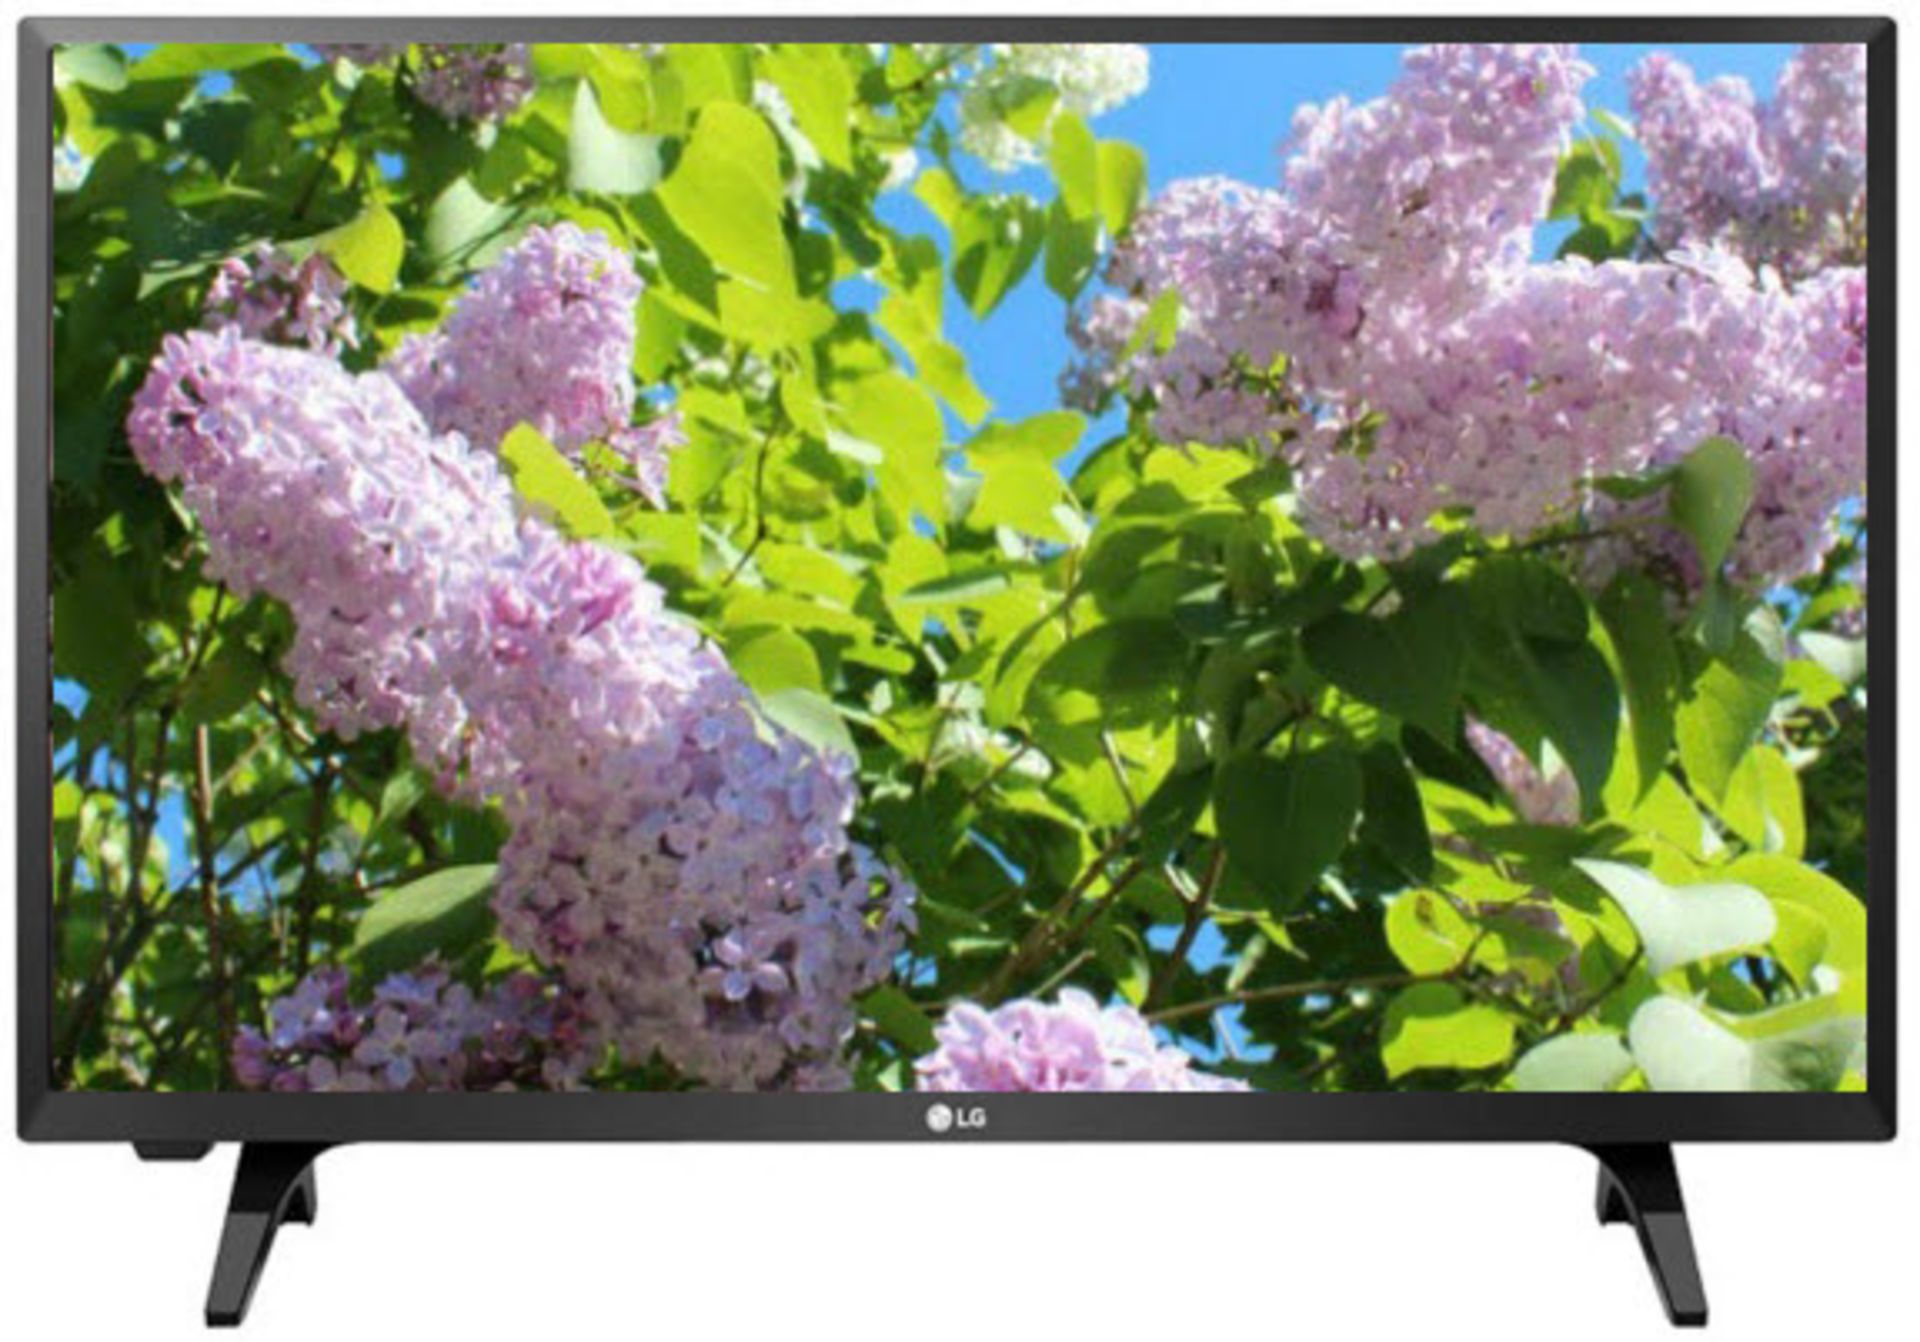 V Grade A LG 28 Inch HD READY LED TV WITH FREEVIEW HD - Model Number 28TK430V